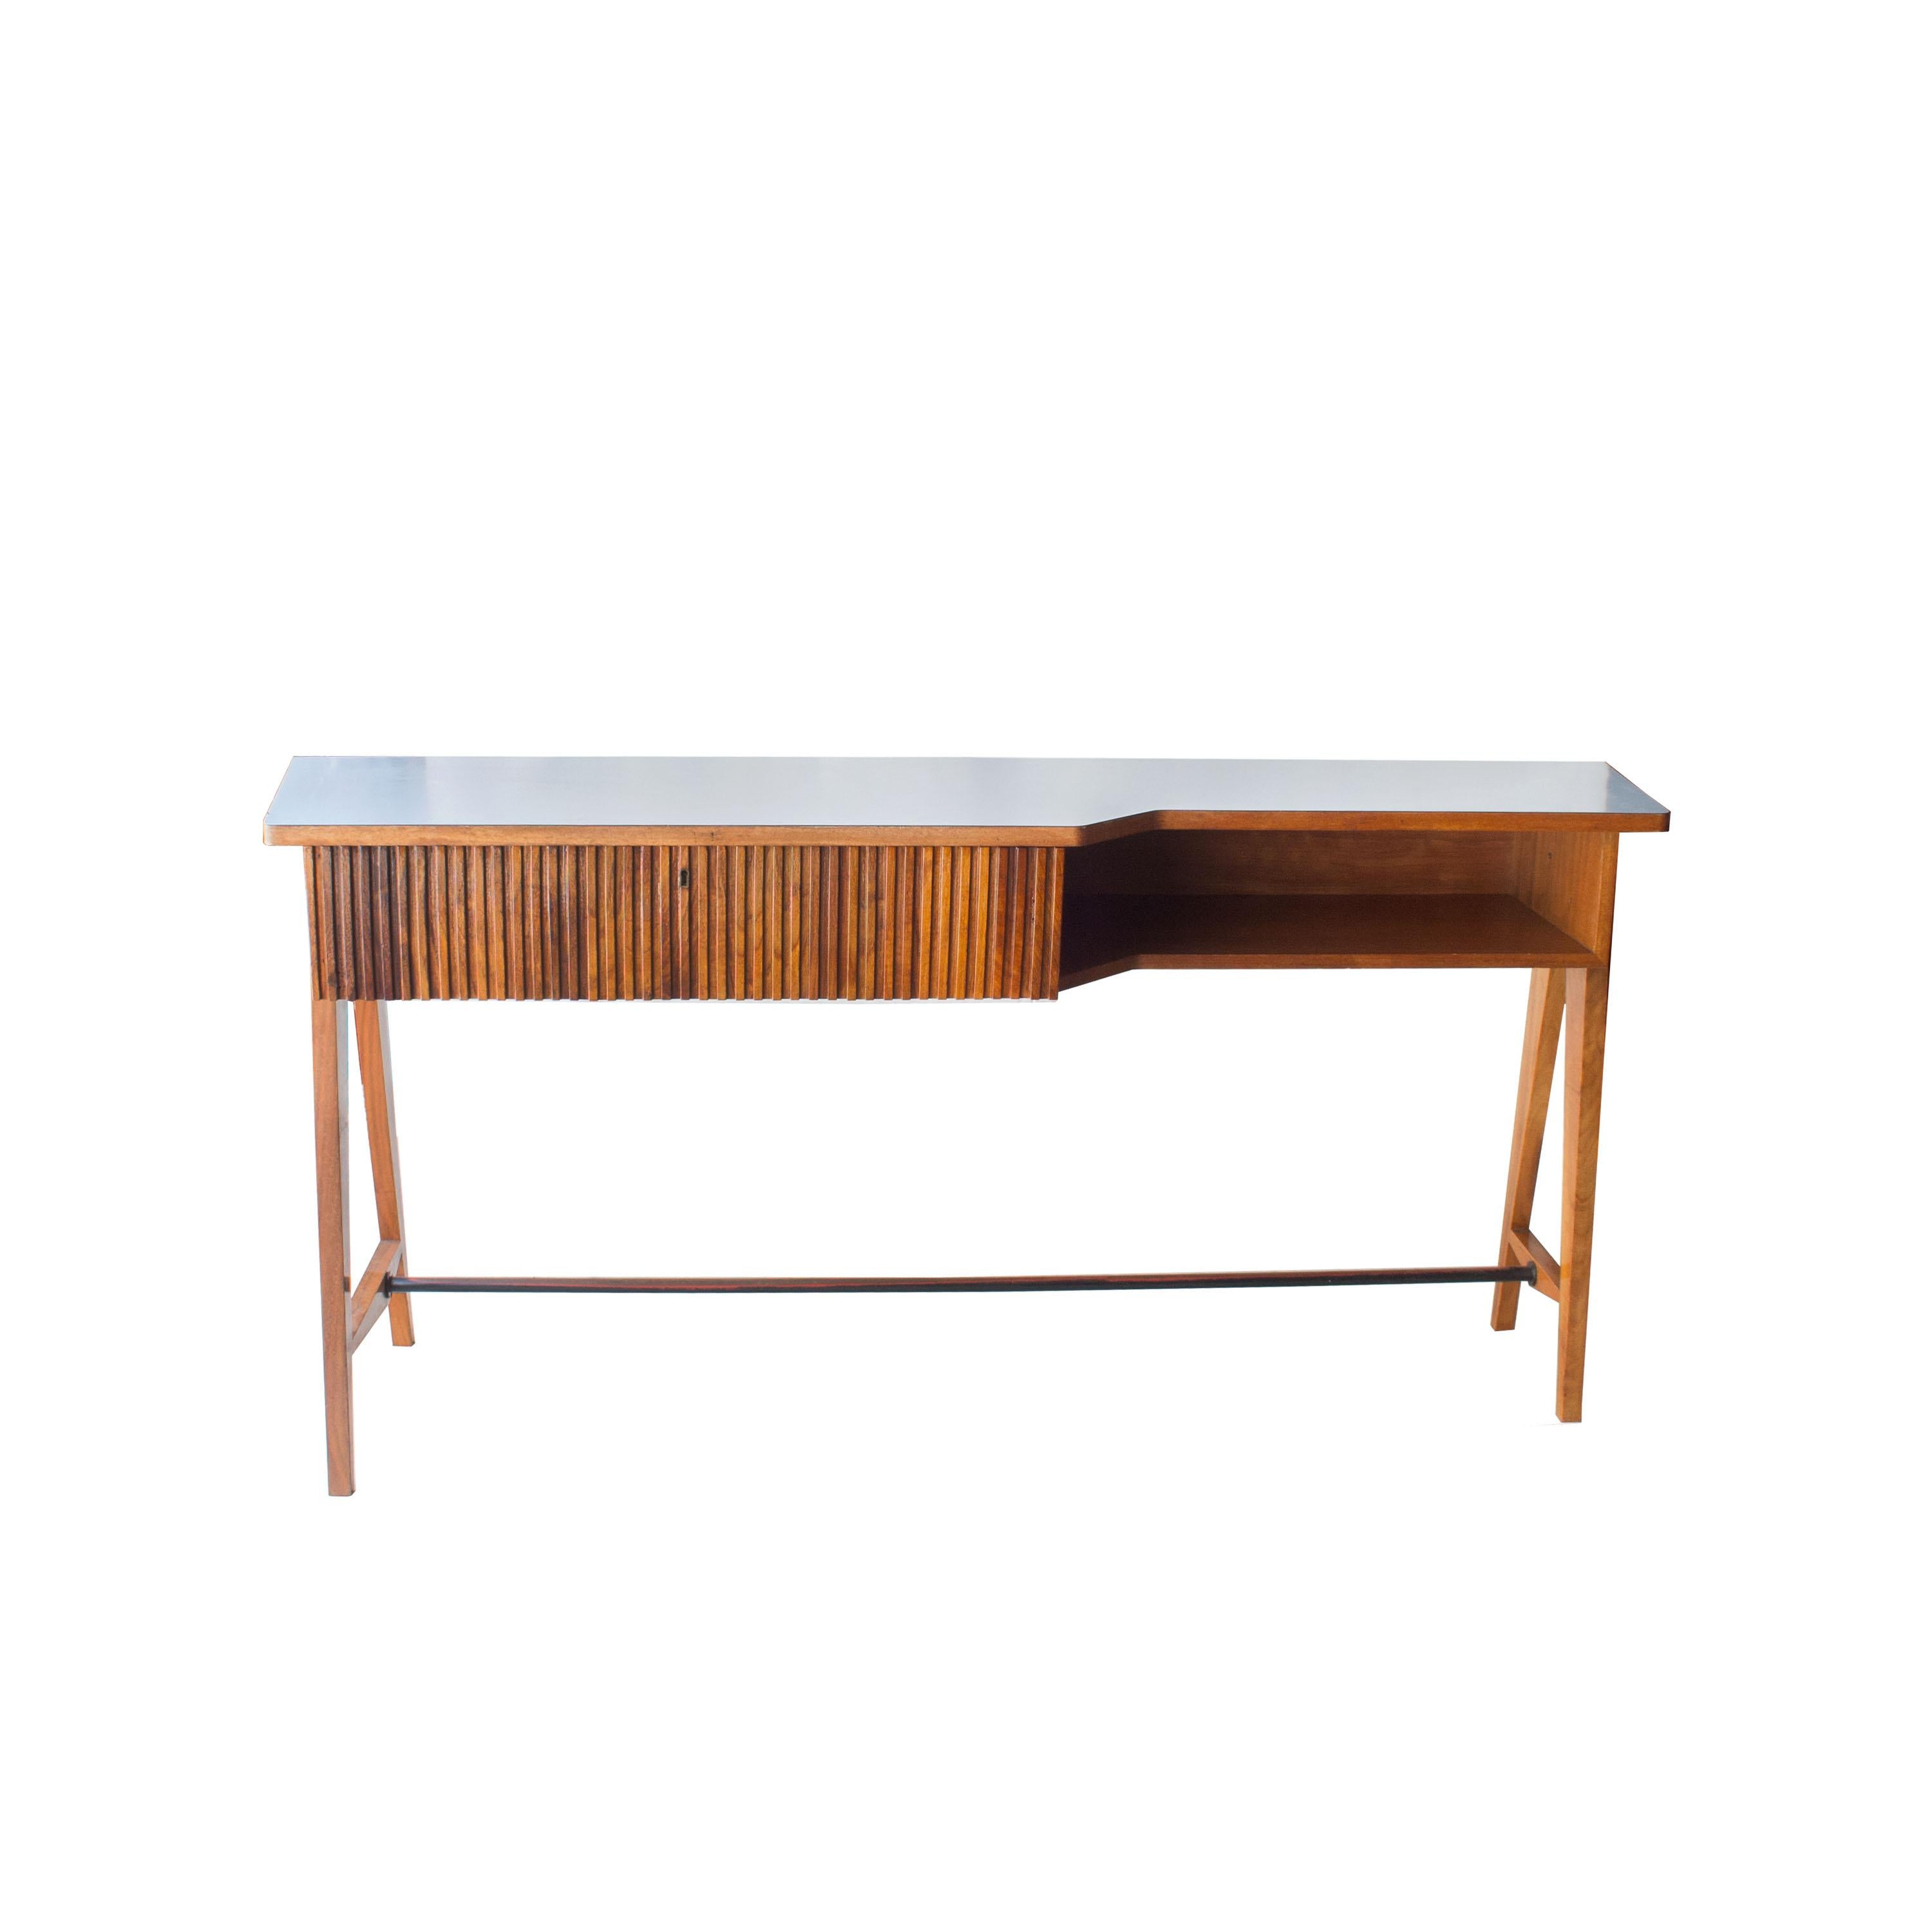 Desk/Consol attributed to Ico Parisi. Compass-shaped legs made of walnut and top covered with light blue melamine. Carved mahogany wood drawer with latch.